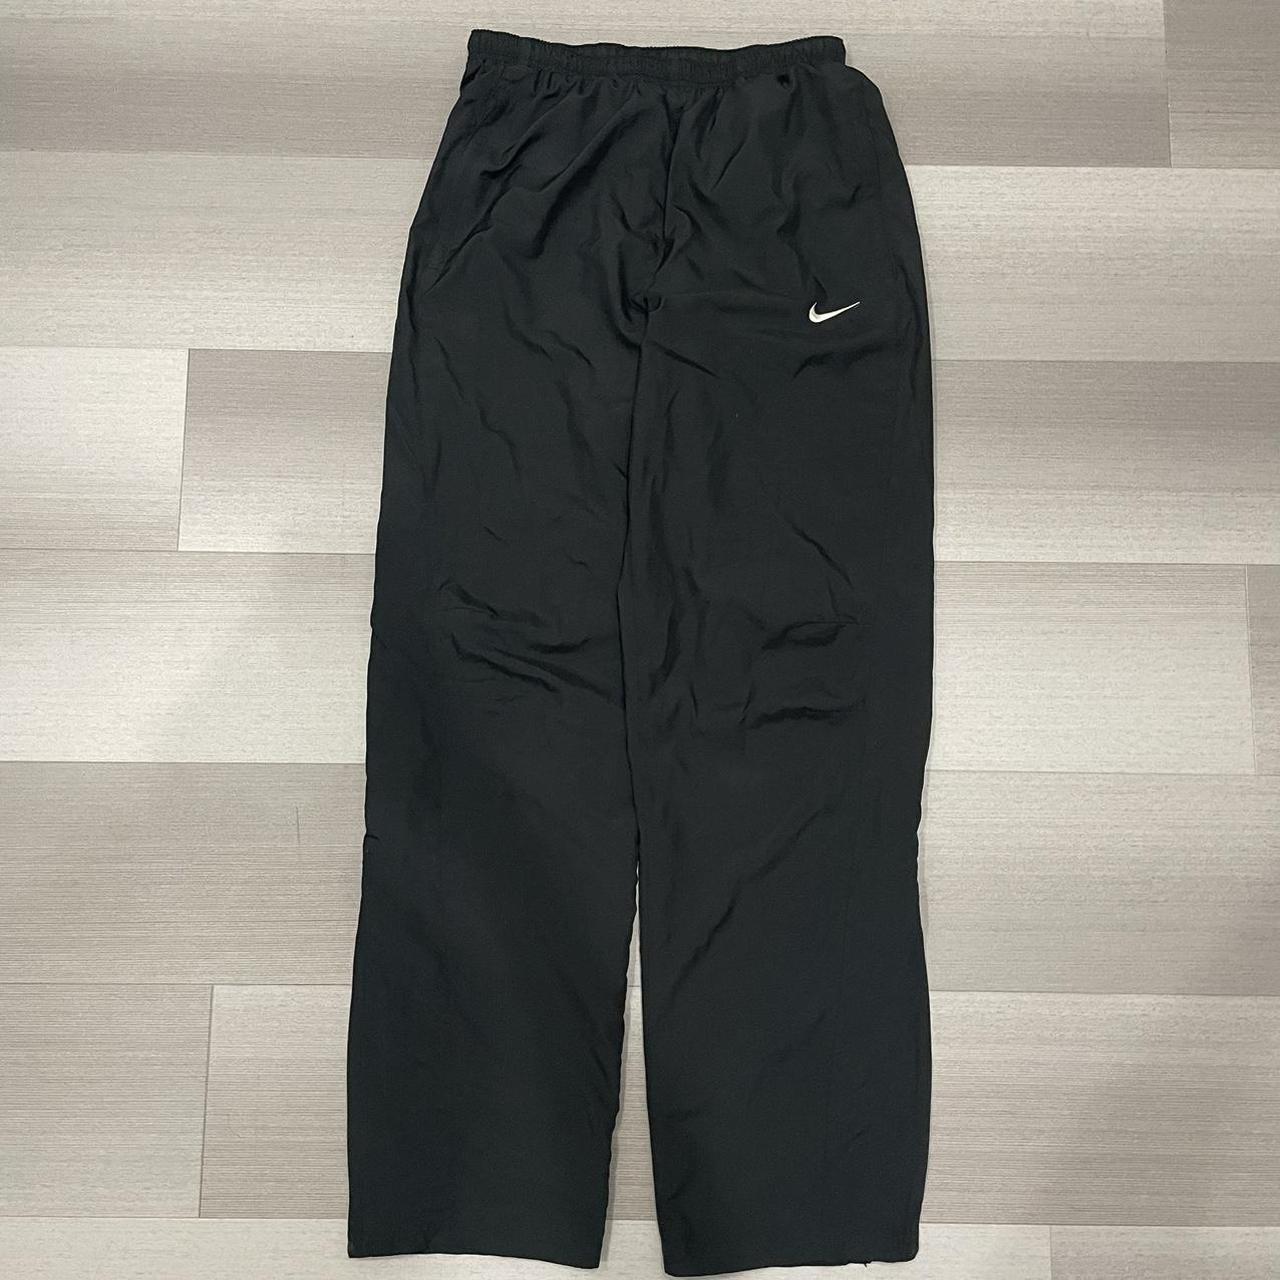 baggy vintage nike track pants open to offers 🦇 - Depop